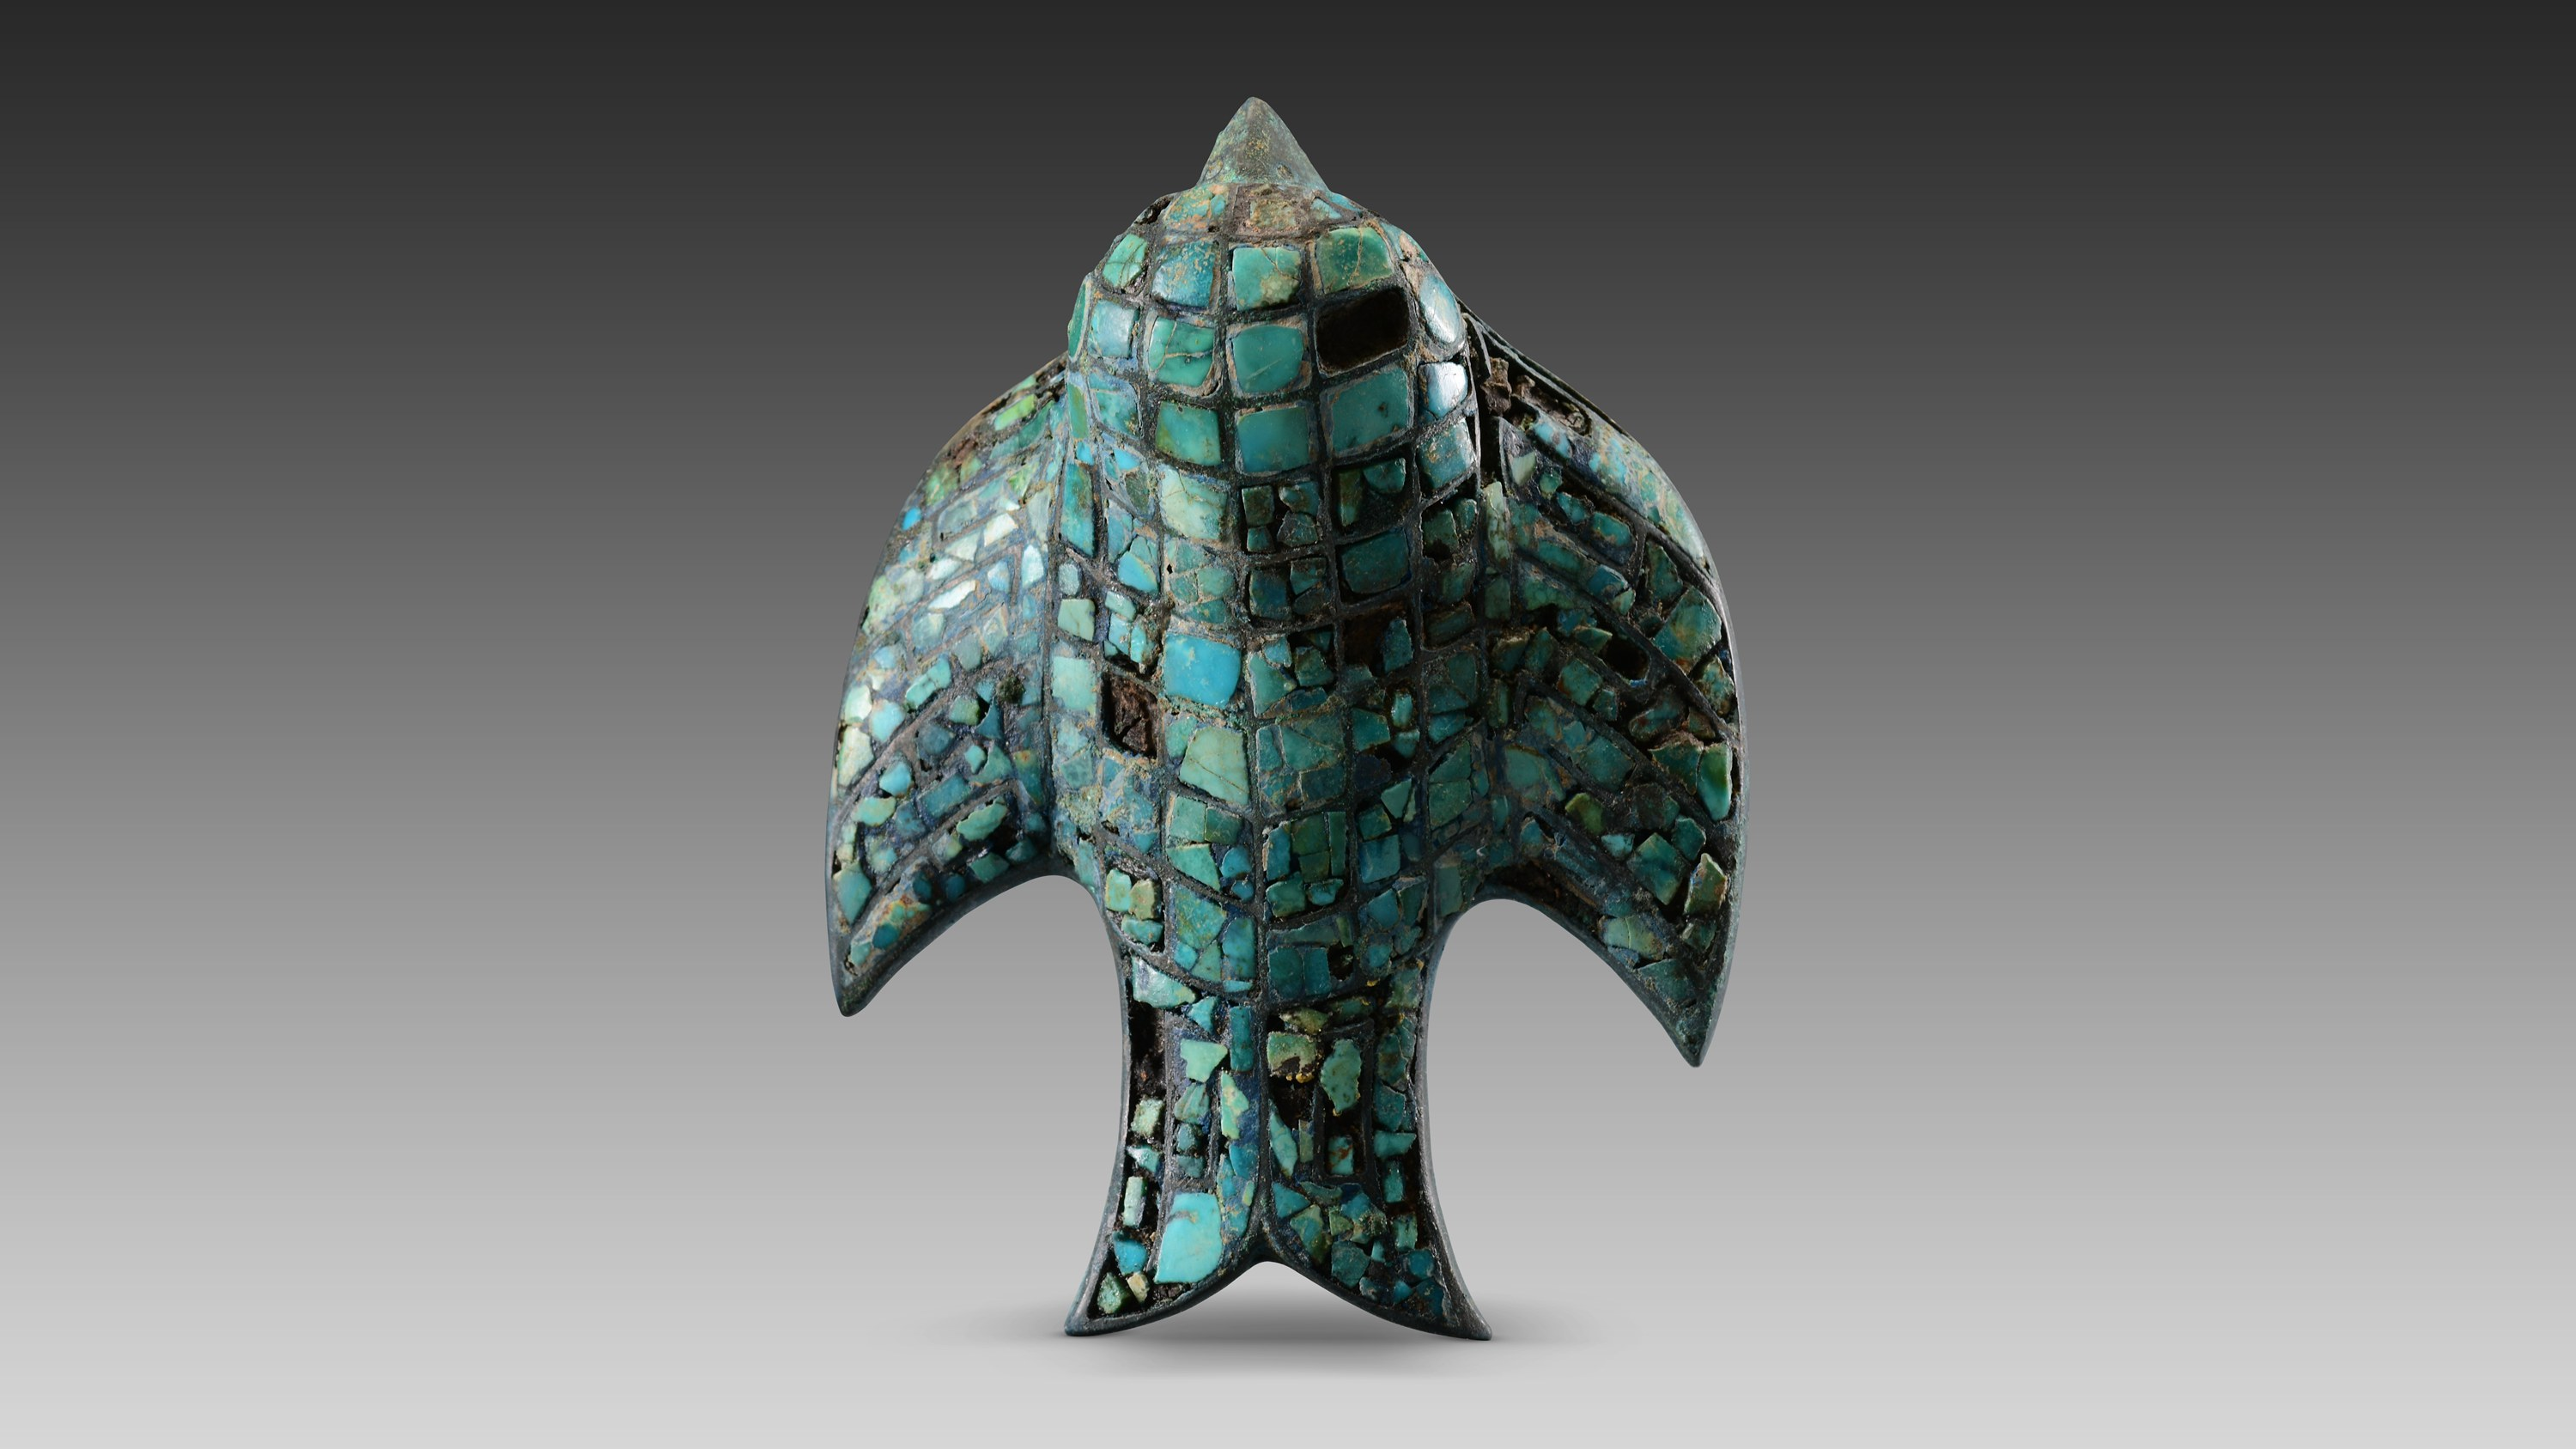 An exquisite turquoise copper bird ornament unearthed from the Zhaigou site in Shaanxi, China. /CNSPhoto